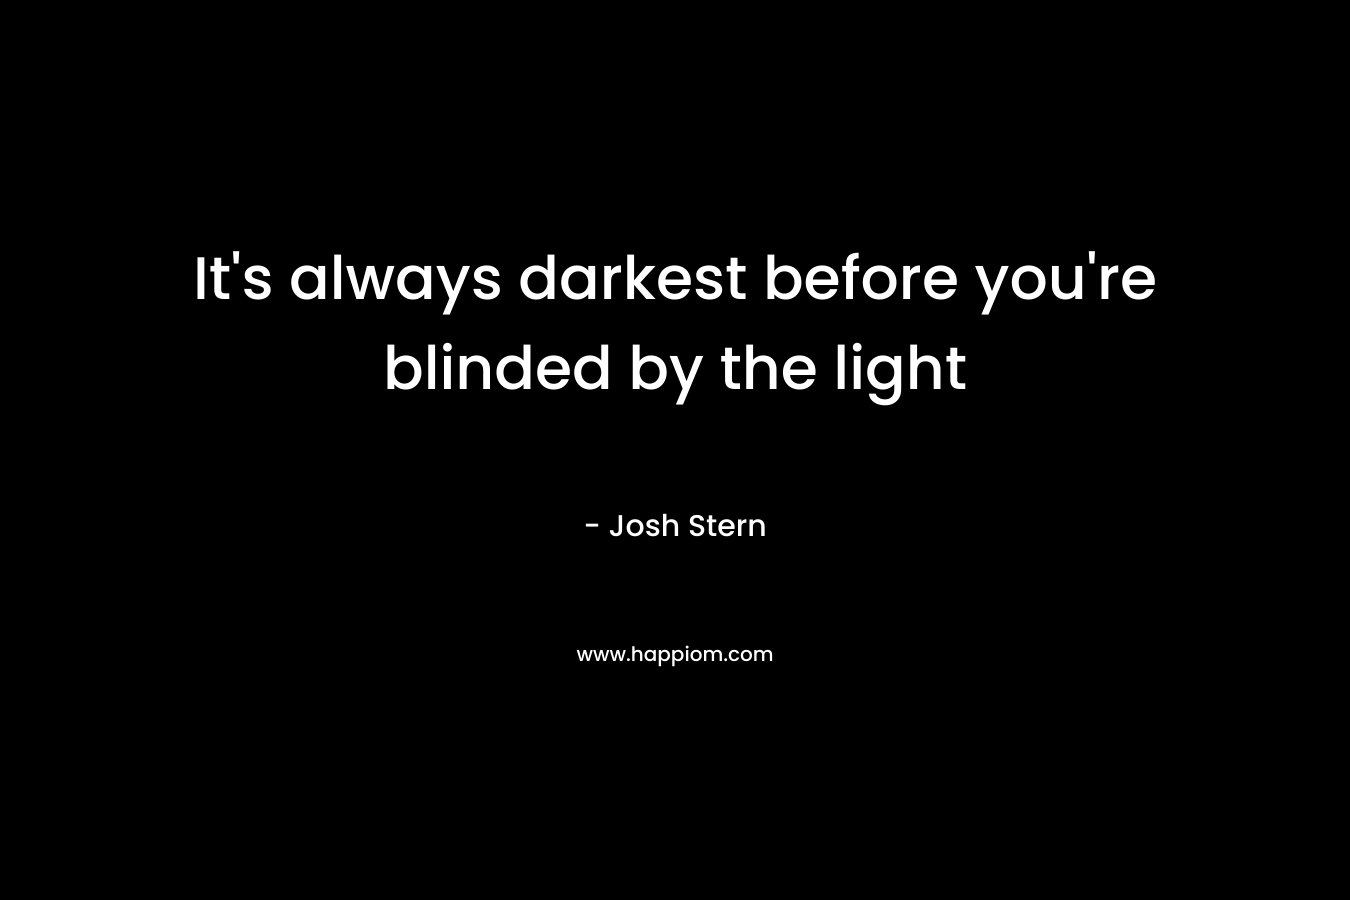 It's always darkest before you're blinded by the light